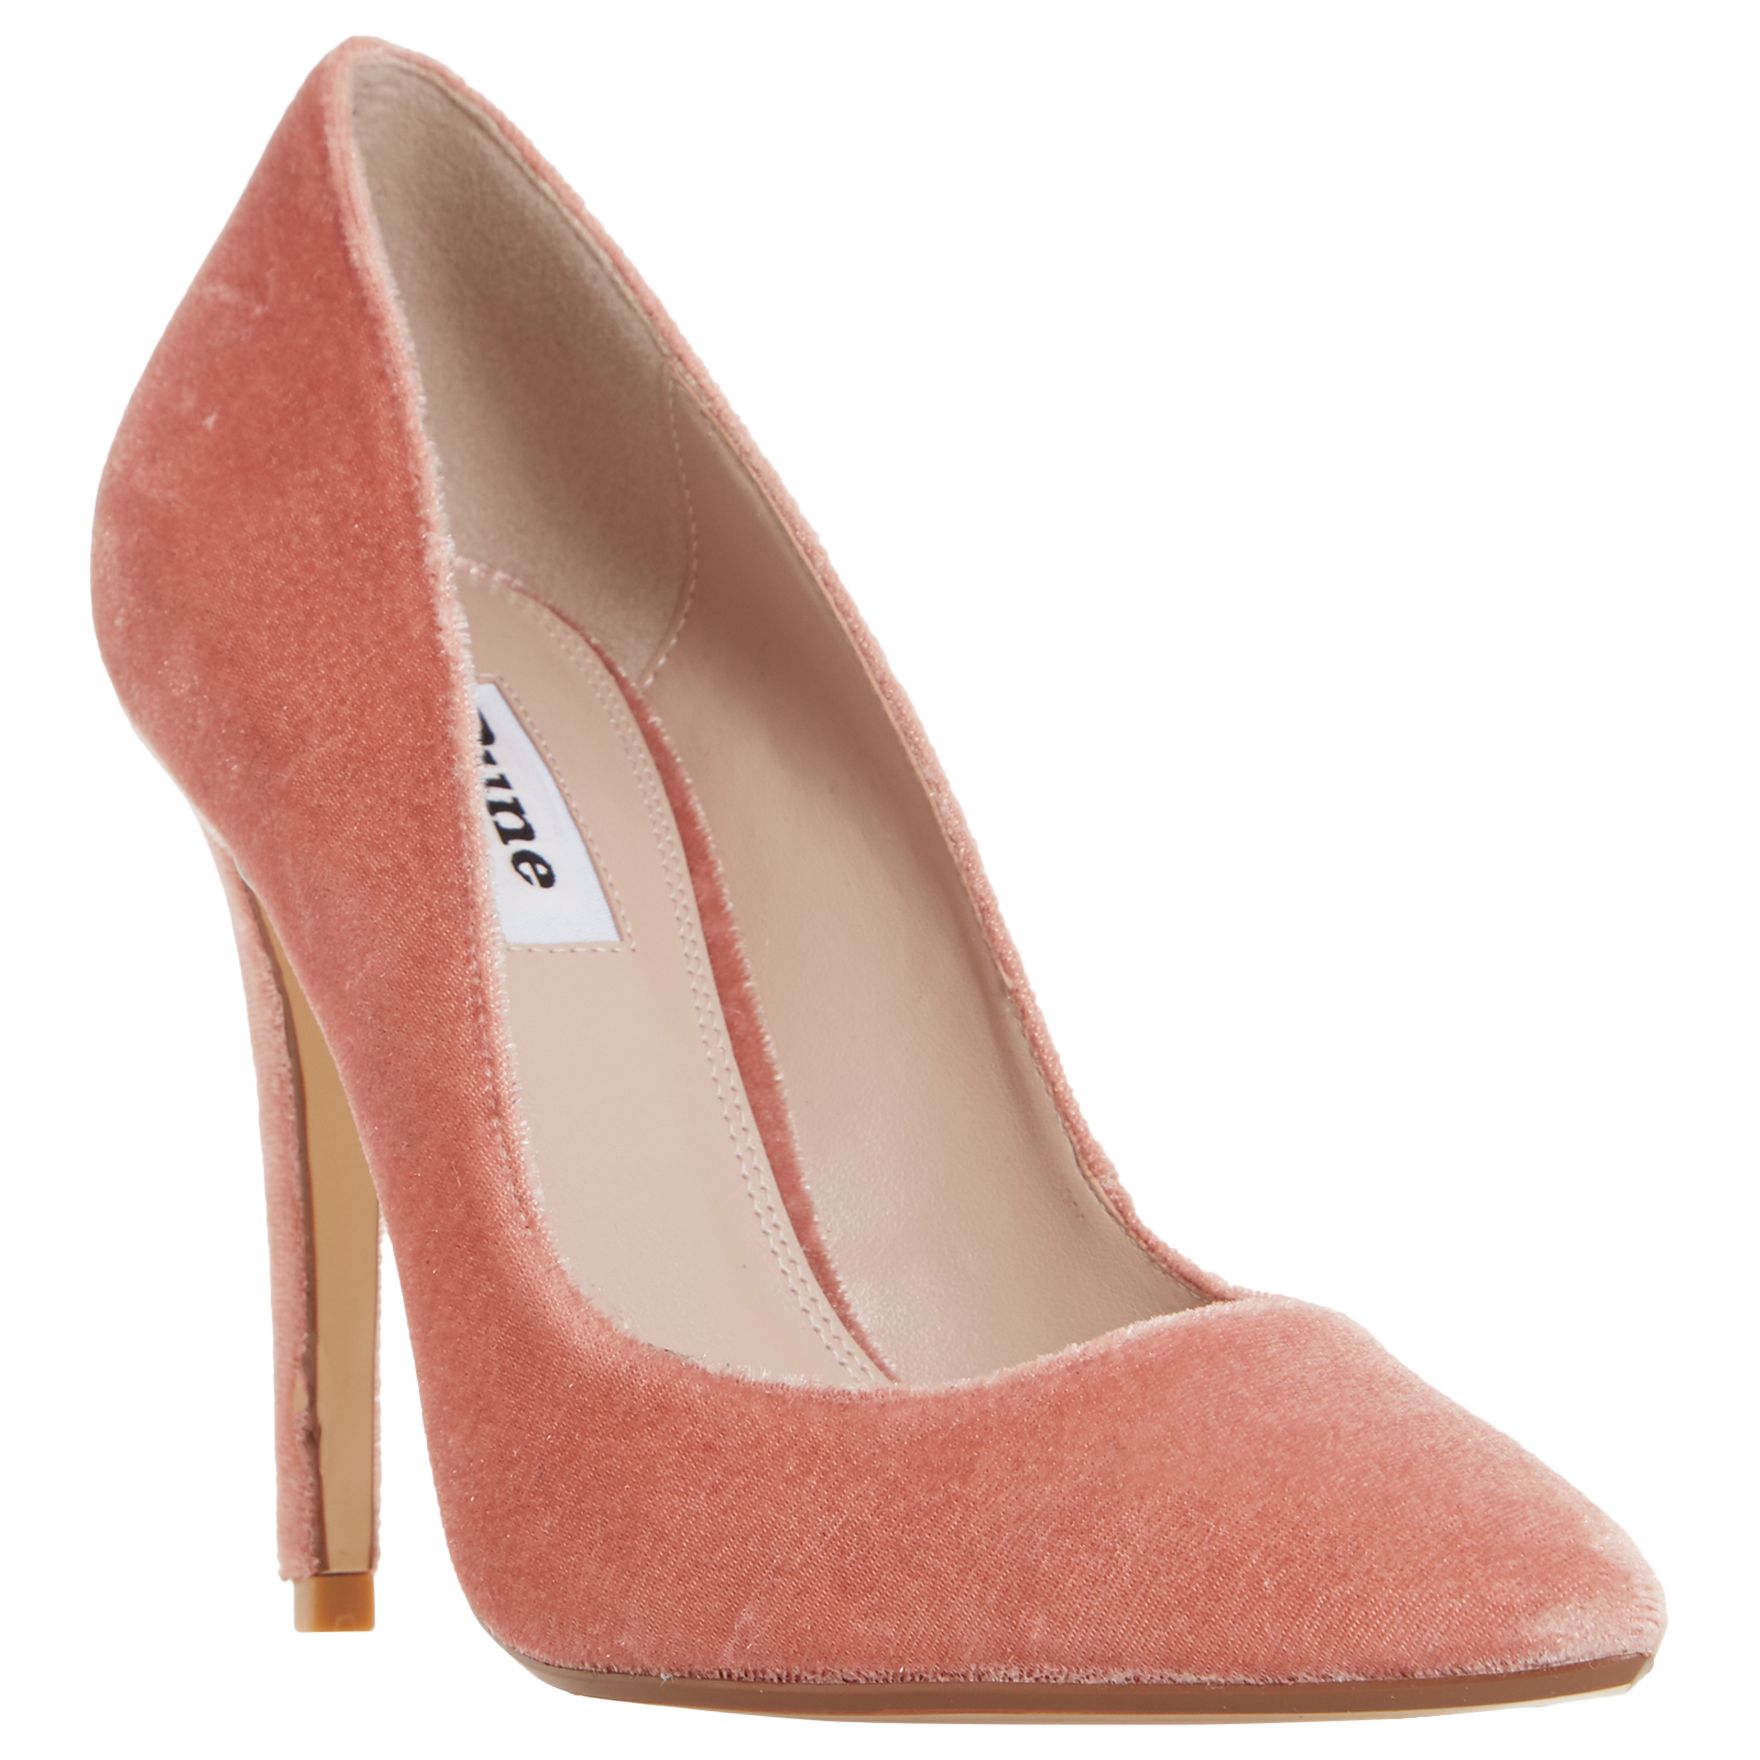 Dune Aiyana Pointed Toe Court Shoes, Blush, 7